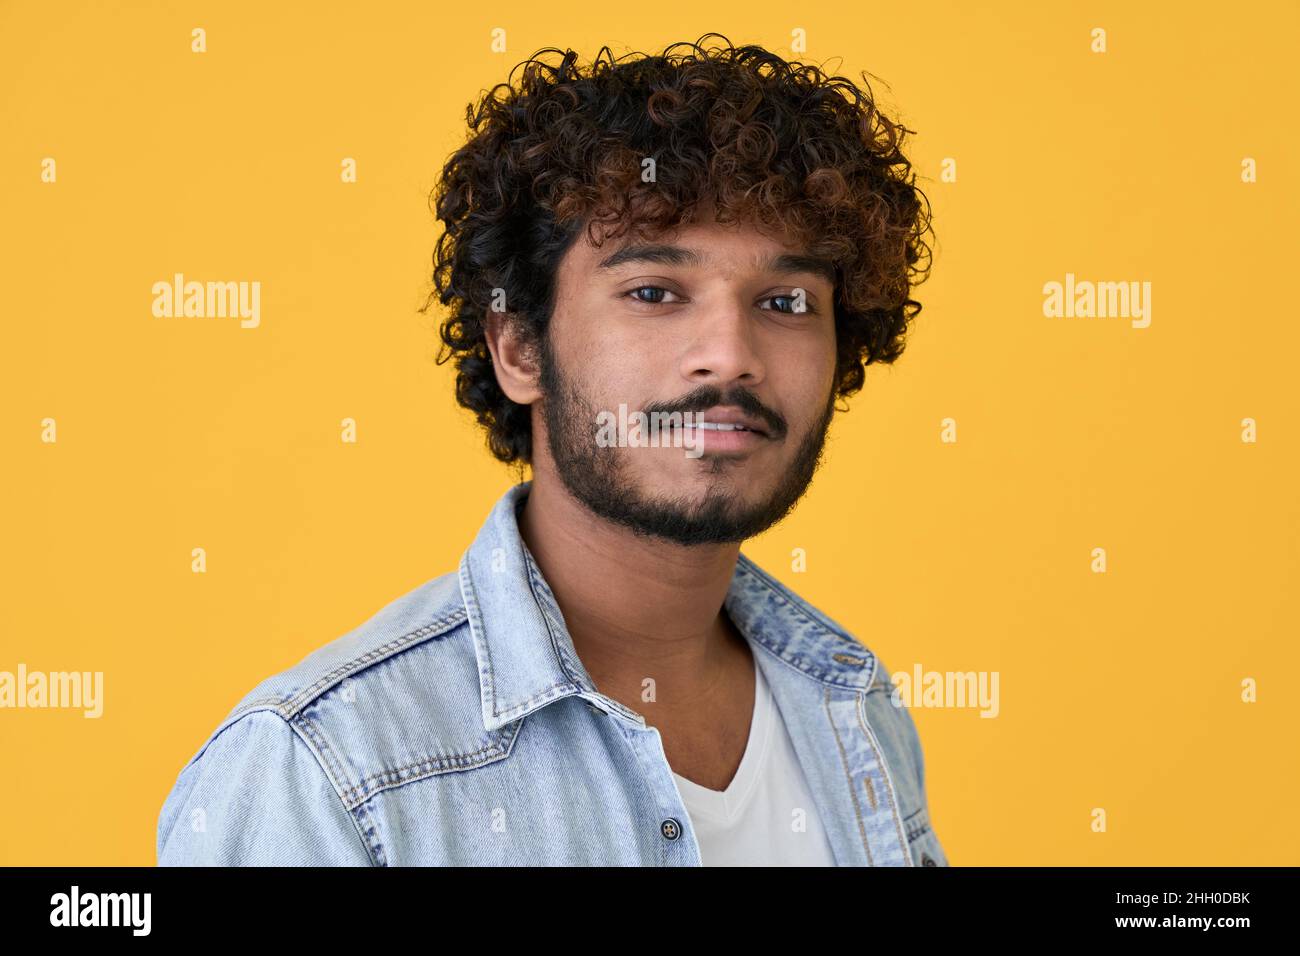 Young indian guy isolated on yellow background, headshot close up portrait. Stock Photo